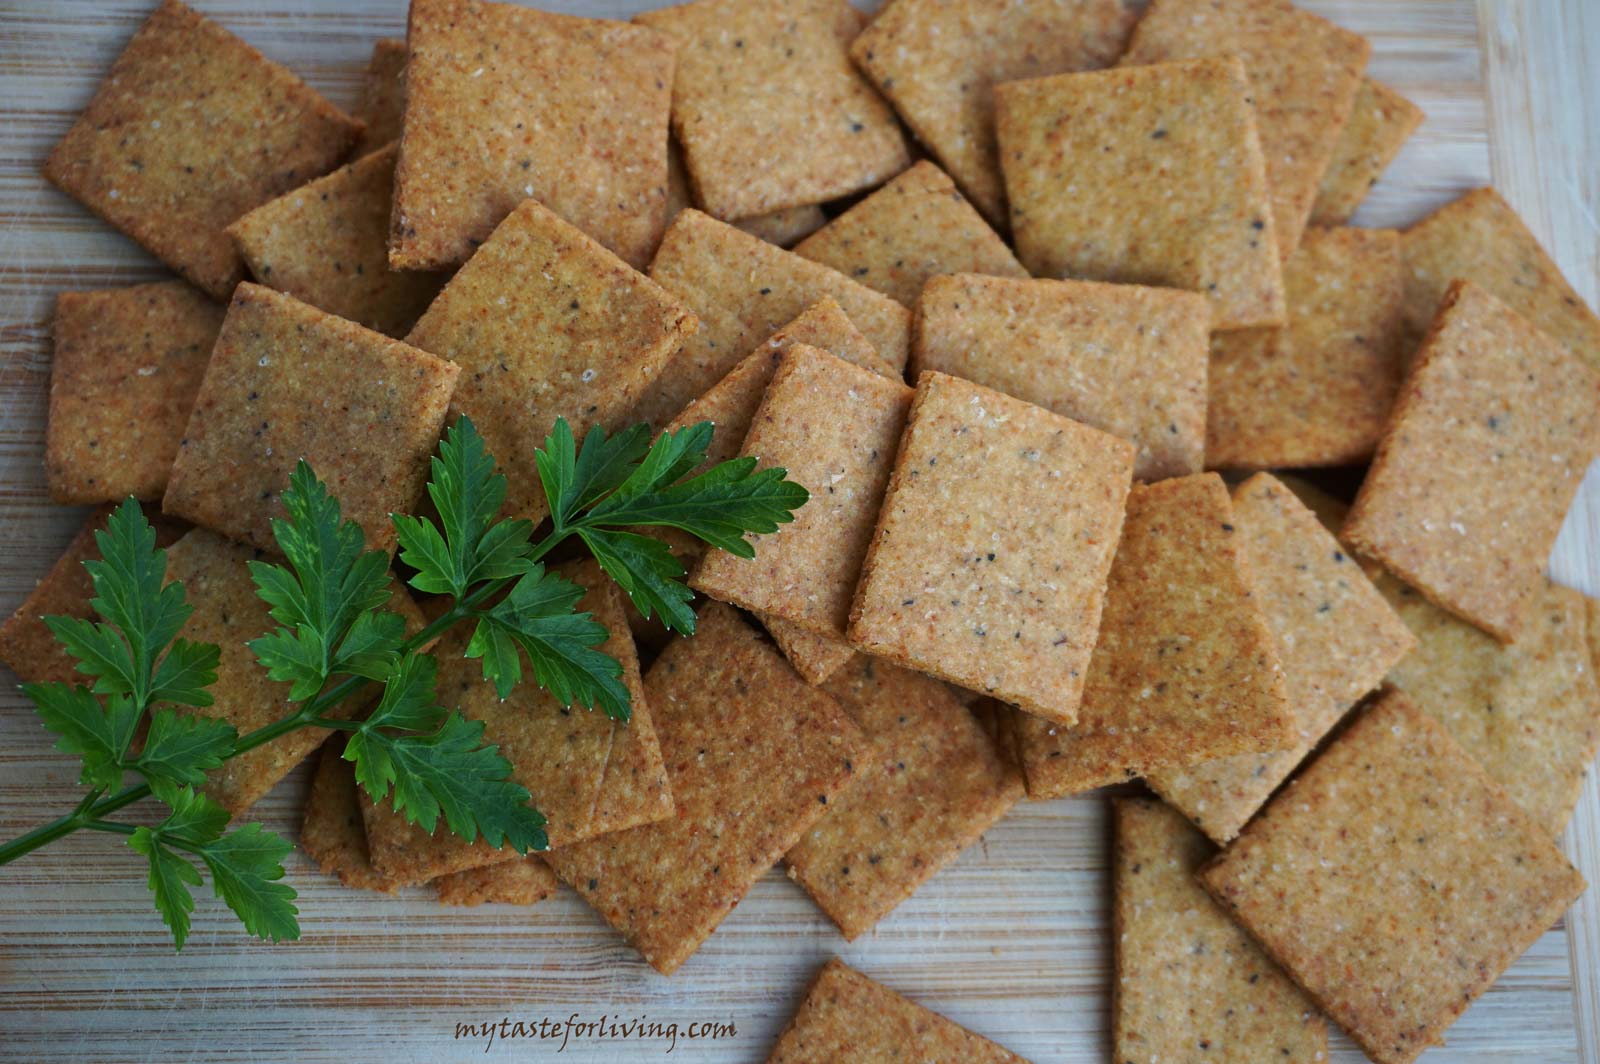 Quick, delicious and crispy crackers made of chickpea flour, which we adore at home. You can add savory, basil or parsley for a stronger flavor. The thinner you roll them, the crispier and tastier they turn out!